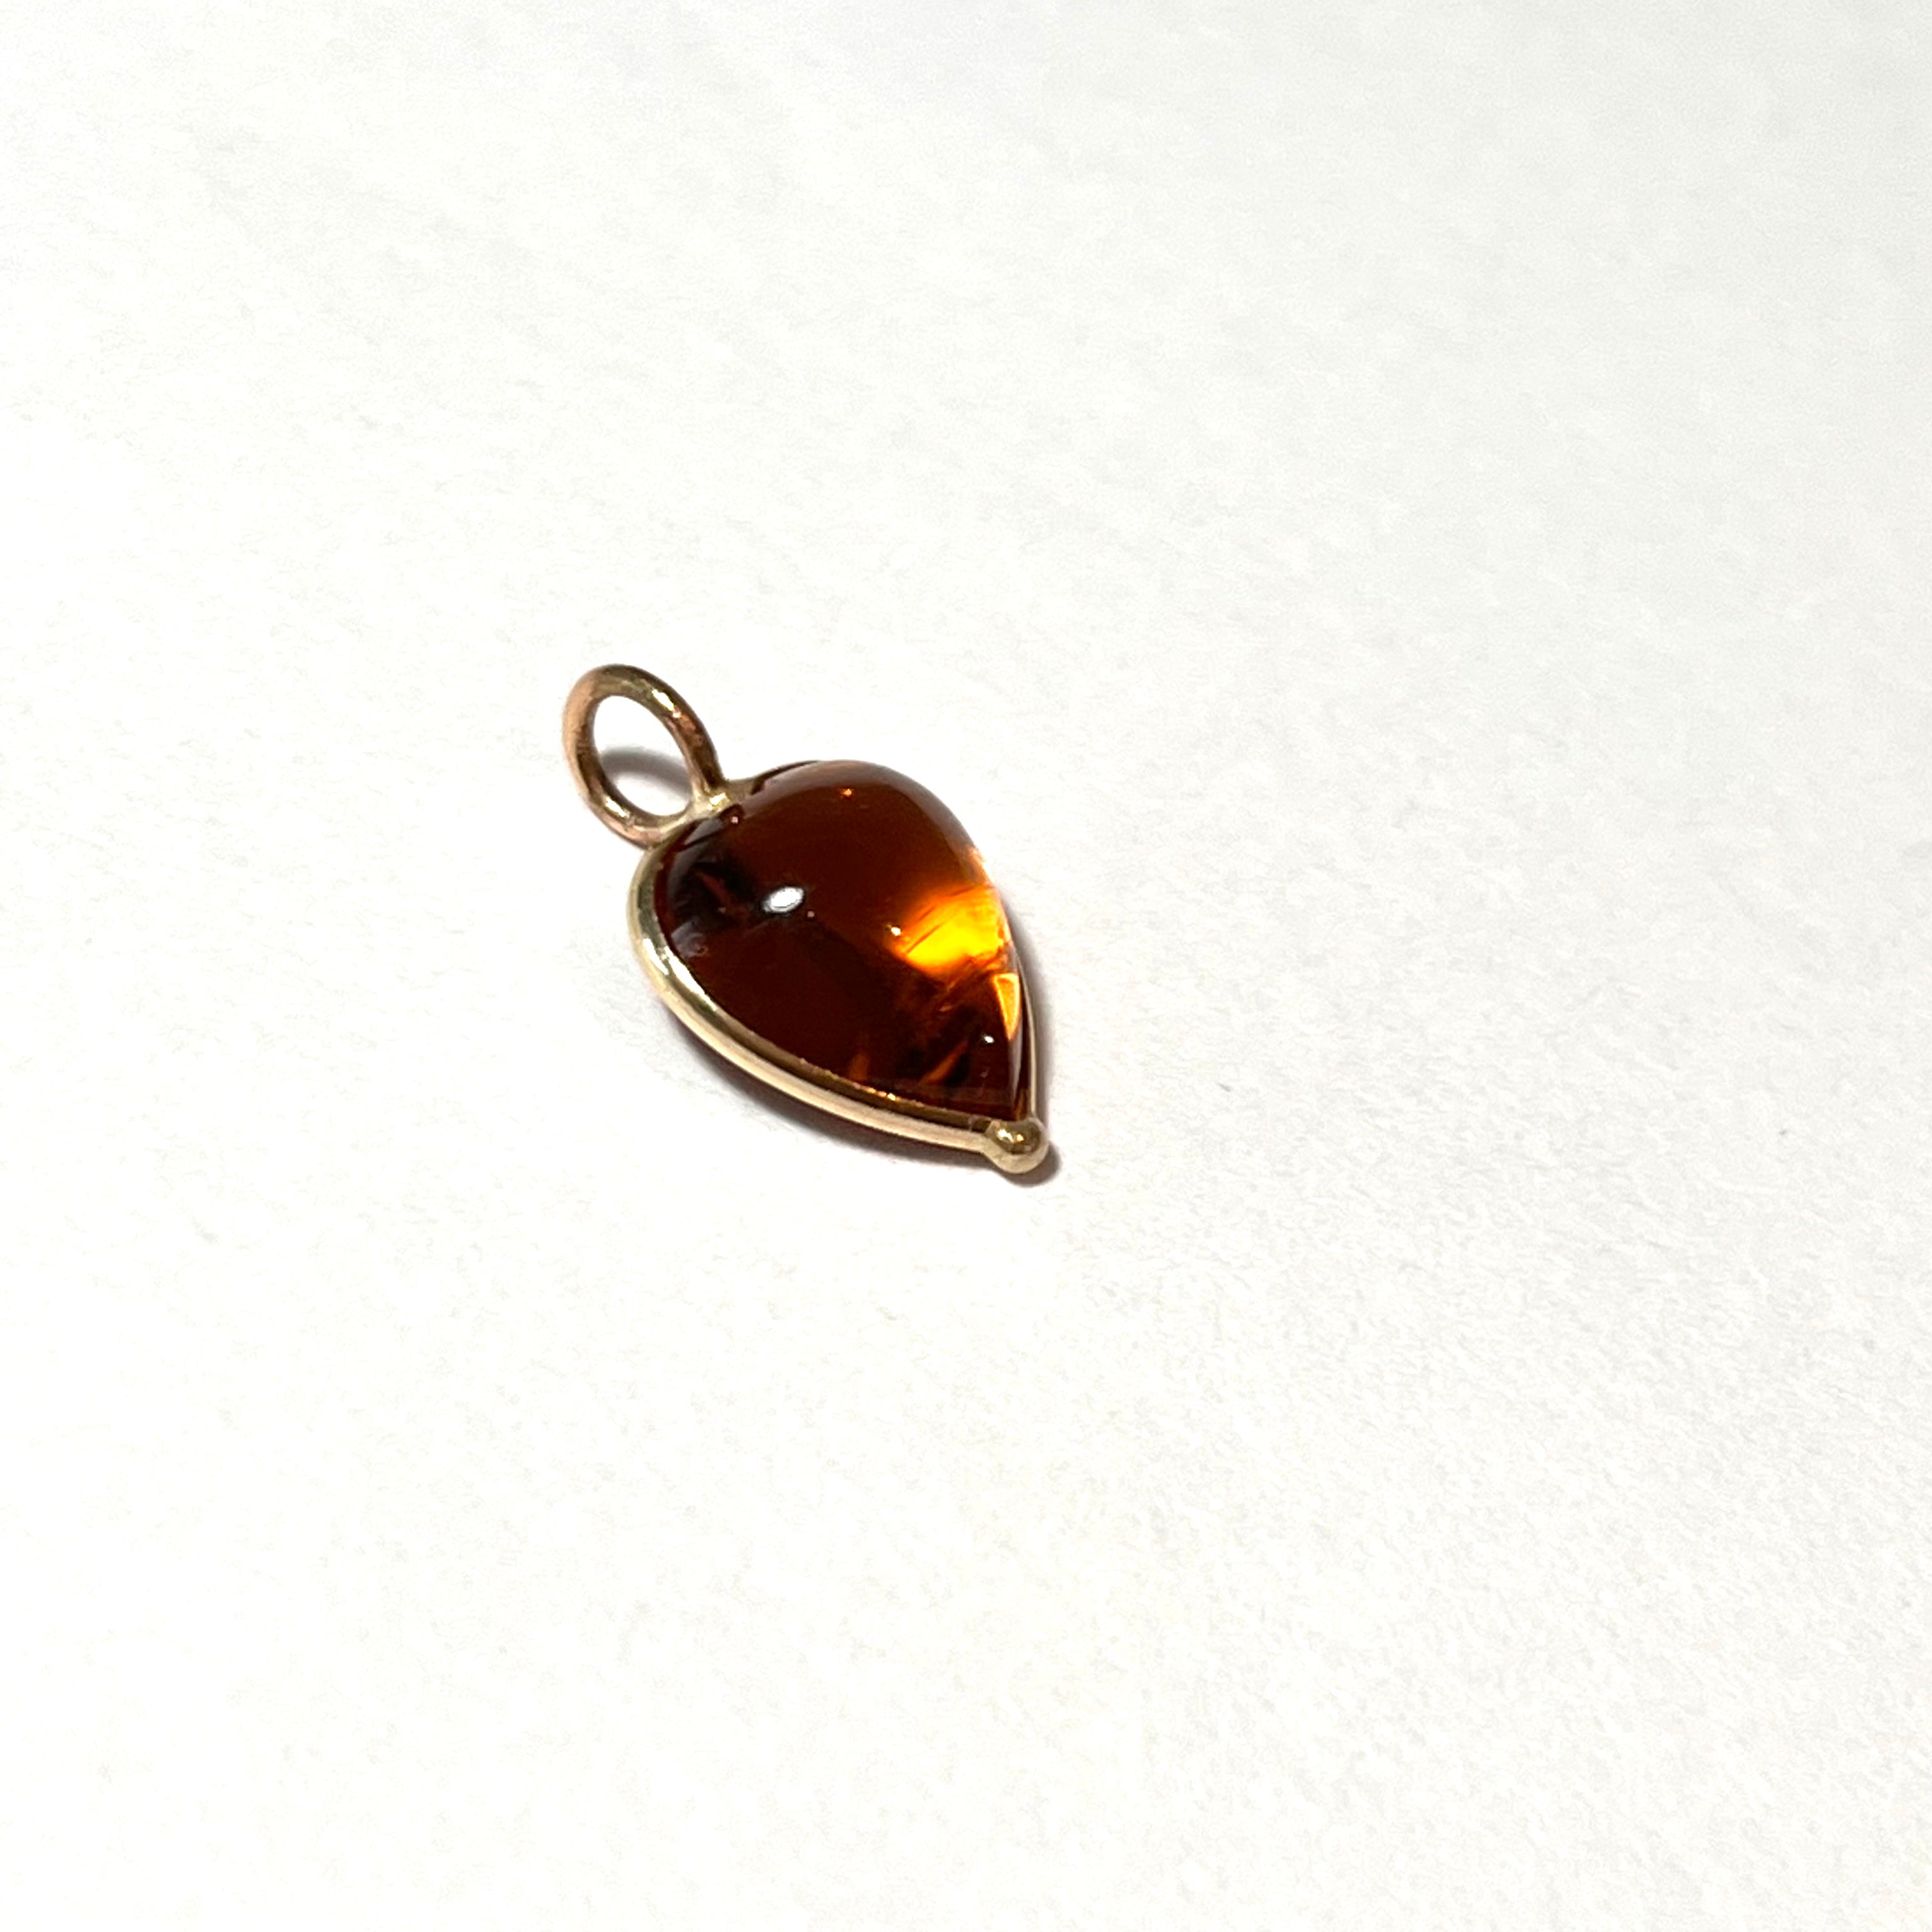 3ct Natural Cabochon Madeira Heart Citrine t 14K Yellow Gold Pendant Charm 16x10mm